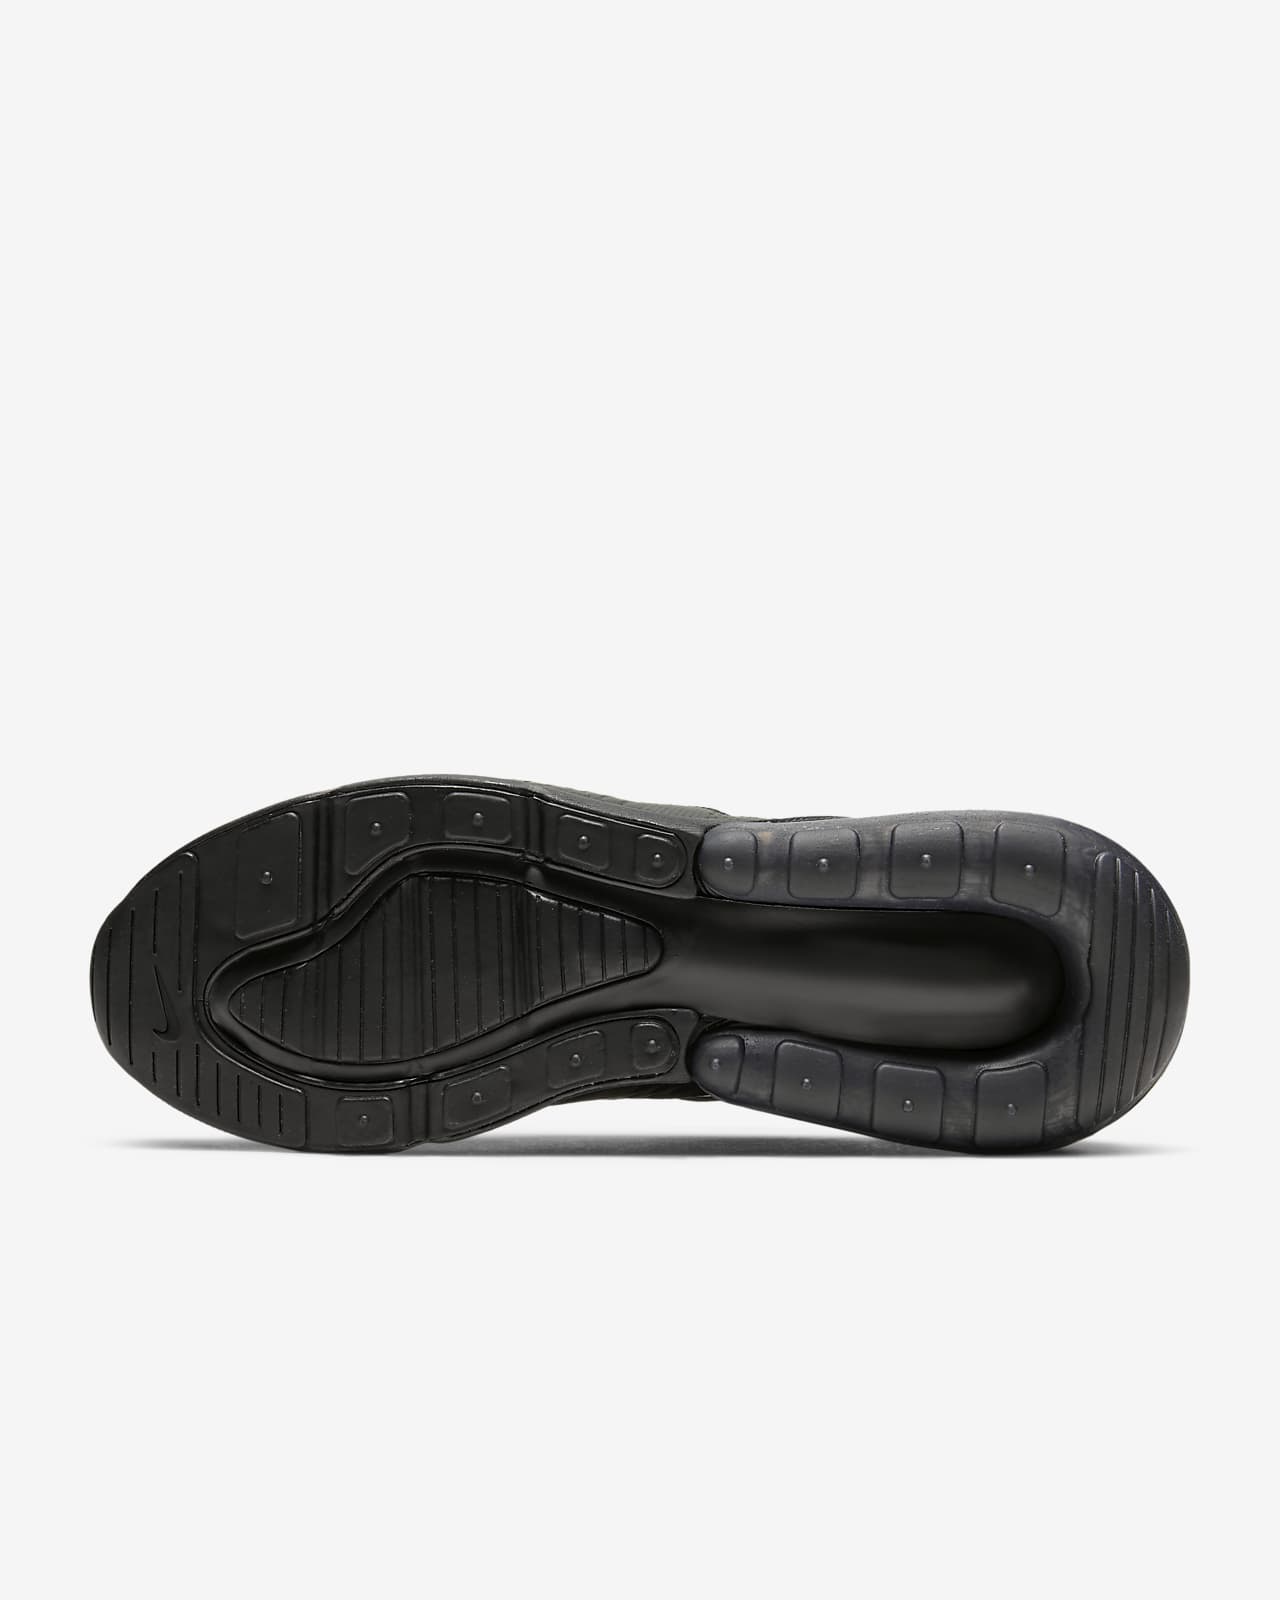 dress shoes with nike soles